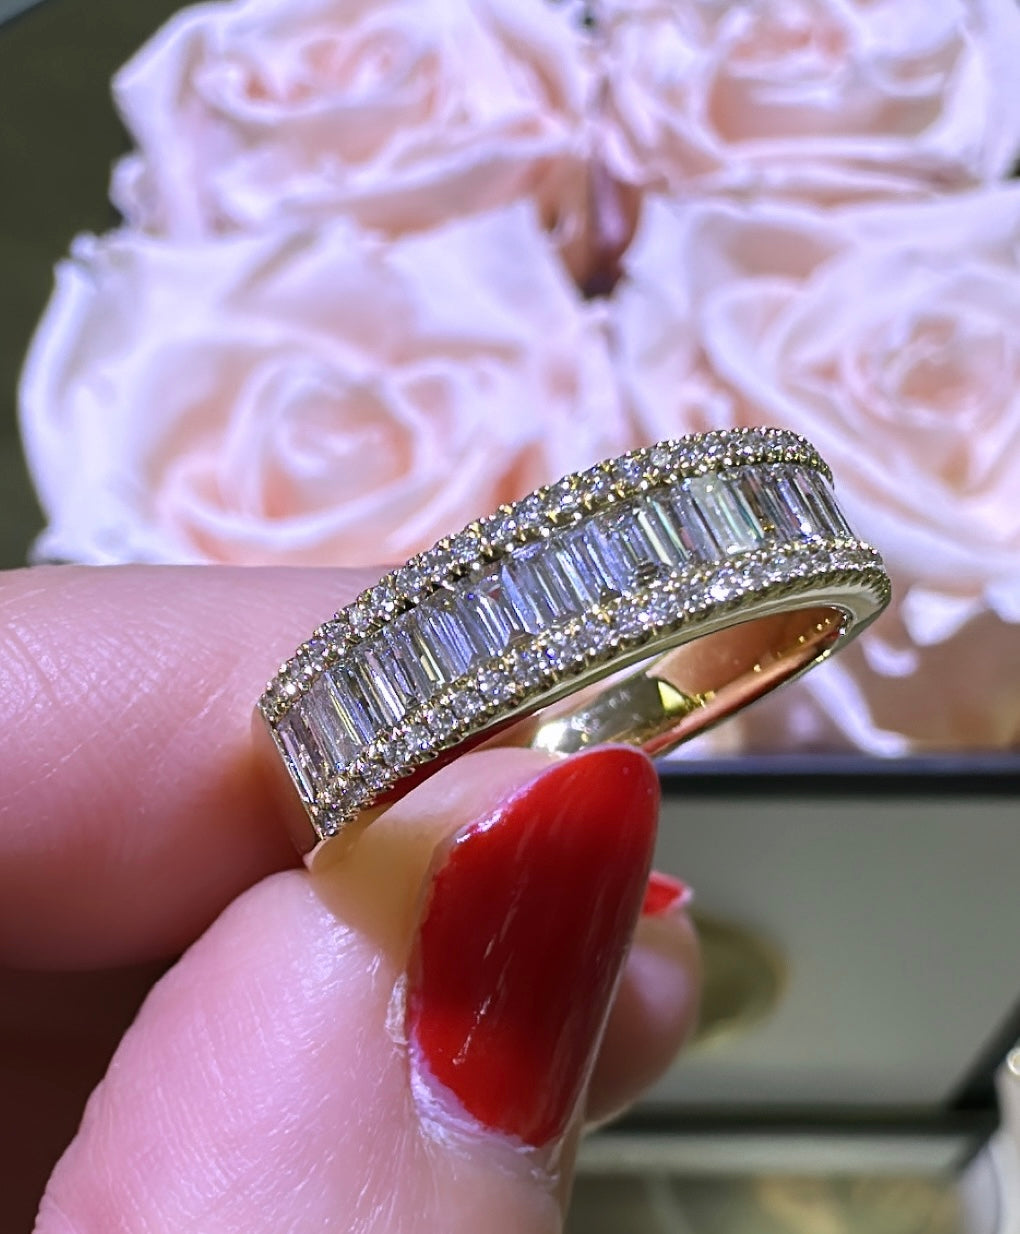 0.64ct t.w. Eternity Baguette Diamond Band Ring